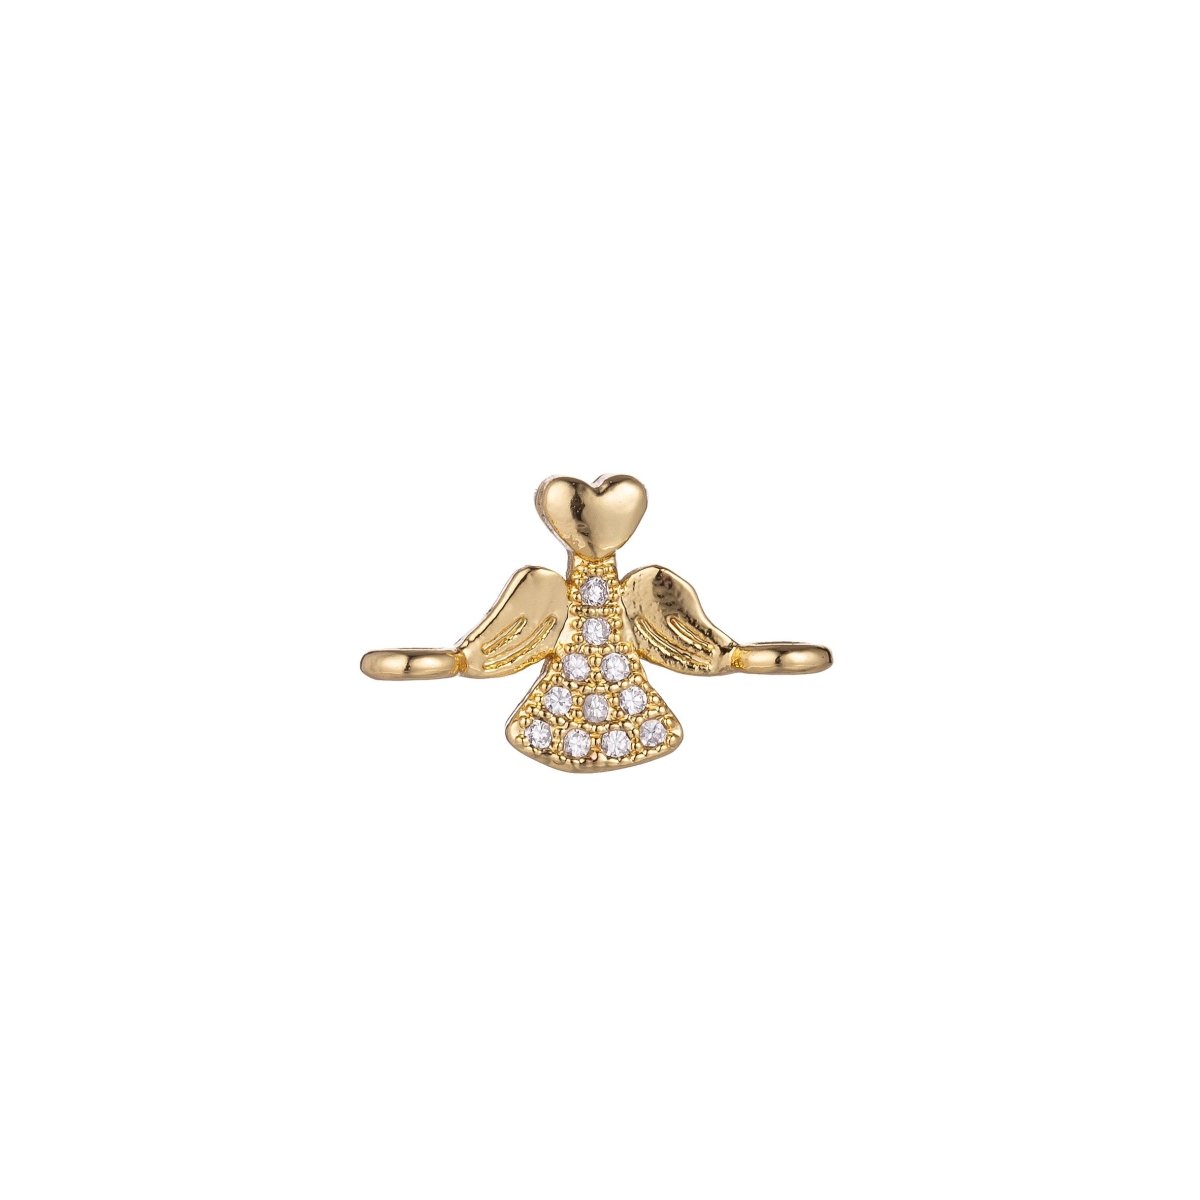 Micro Pave CZ Charm 18K Gold Filled Heart Angel Bracelet Charm Bead Finding Connector for earring Necklace Jewelry Making F-223 - DLUXCA